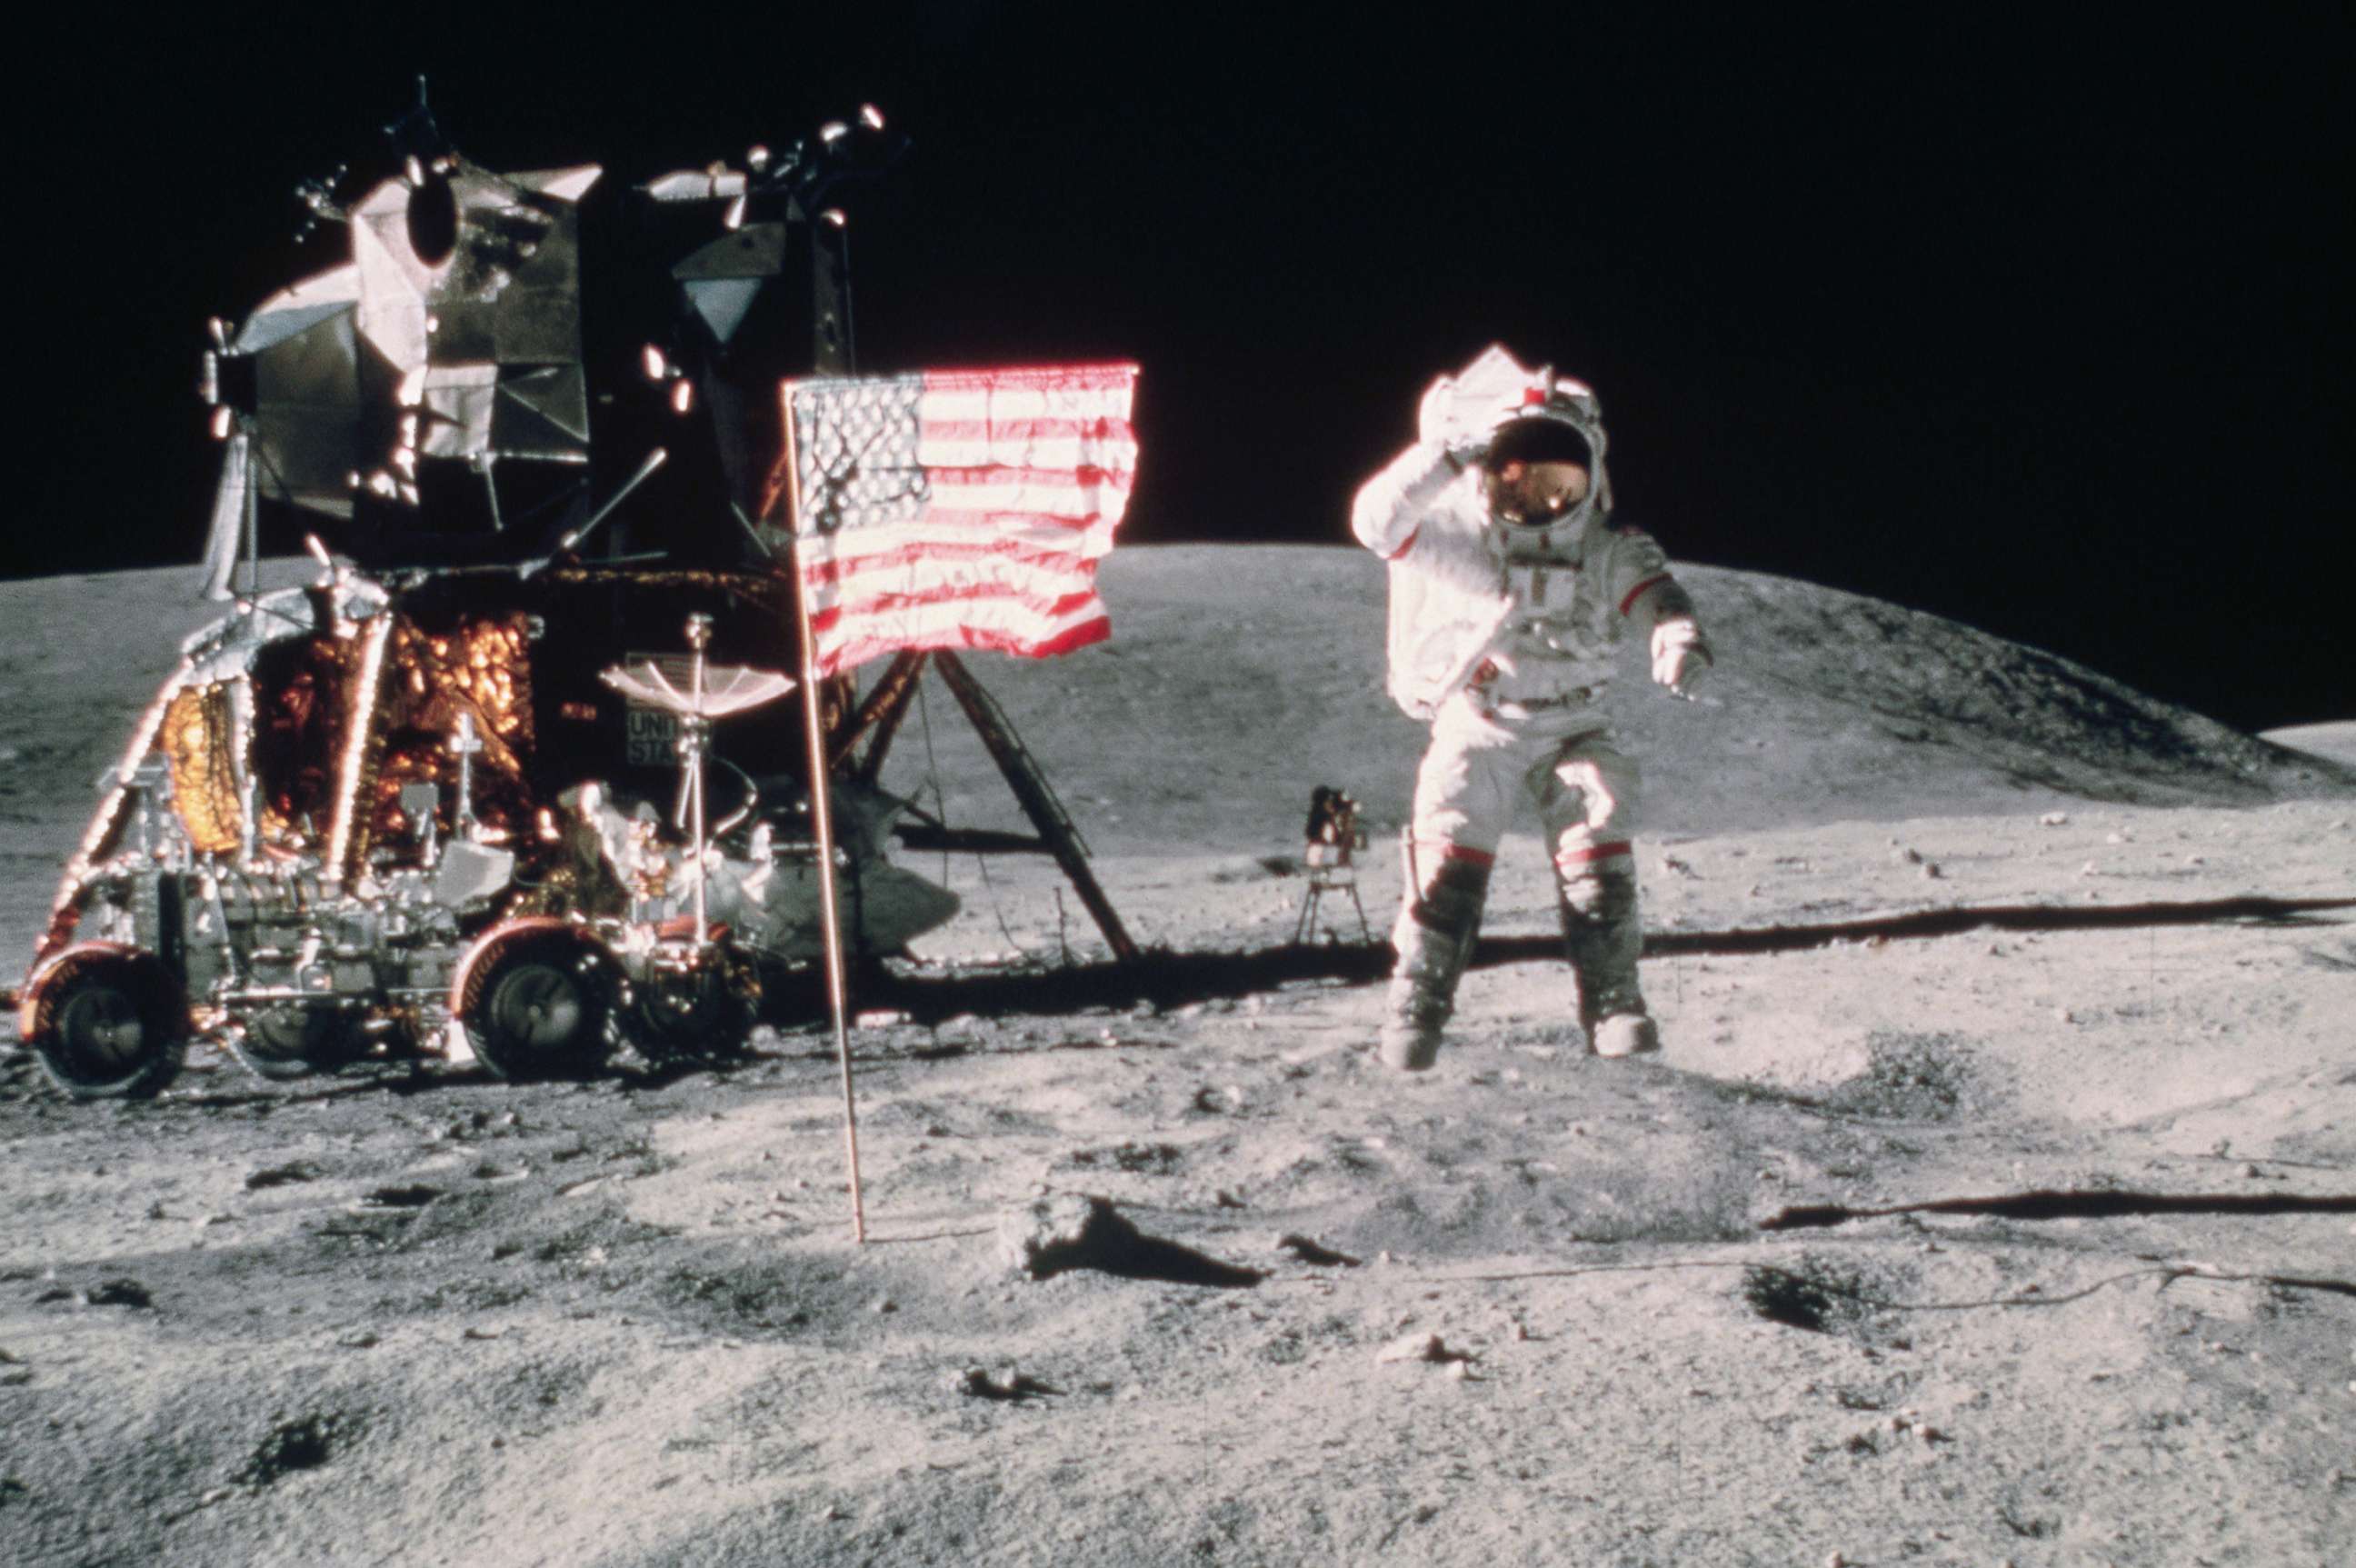 PHOTO: John W. Young, Commander of Apollo 16 moon mission, salutes the United States flag as he leaps from the lunar surface near the lunar lander in this undated file photo. 